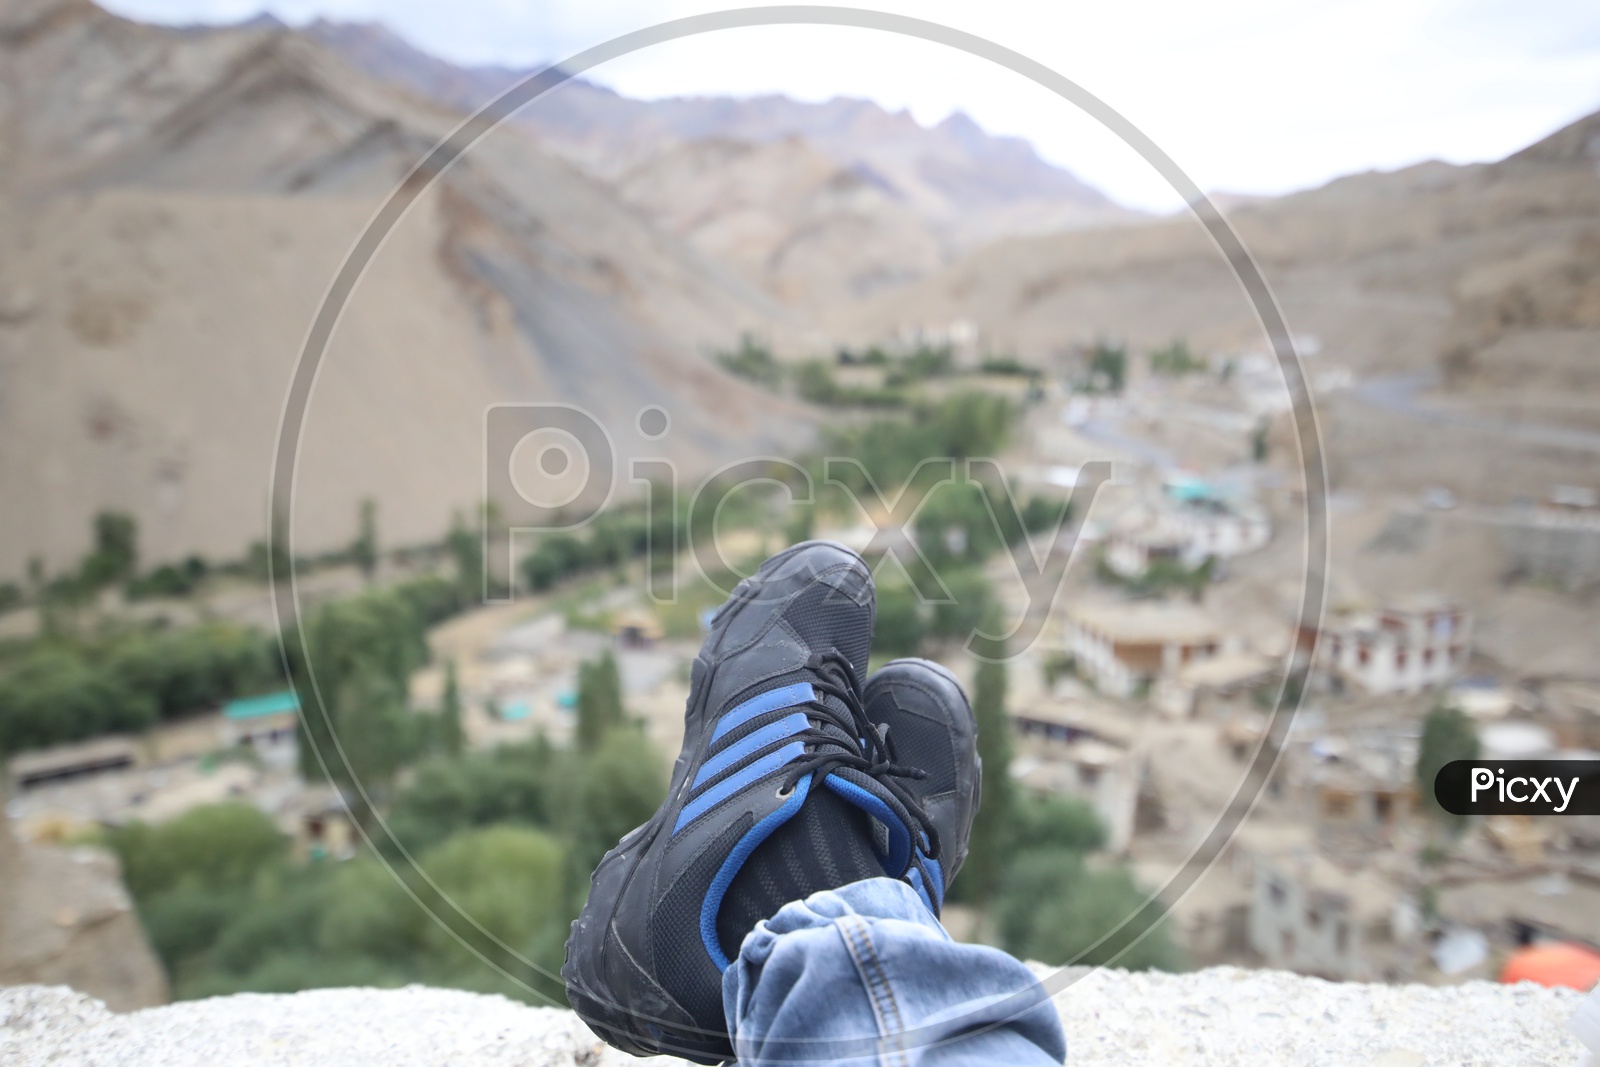 A Composition Shot Of Tourists With Their Legs and Valley Views In Leh